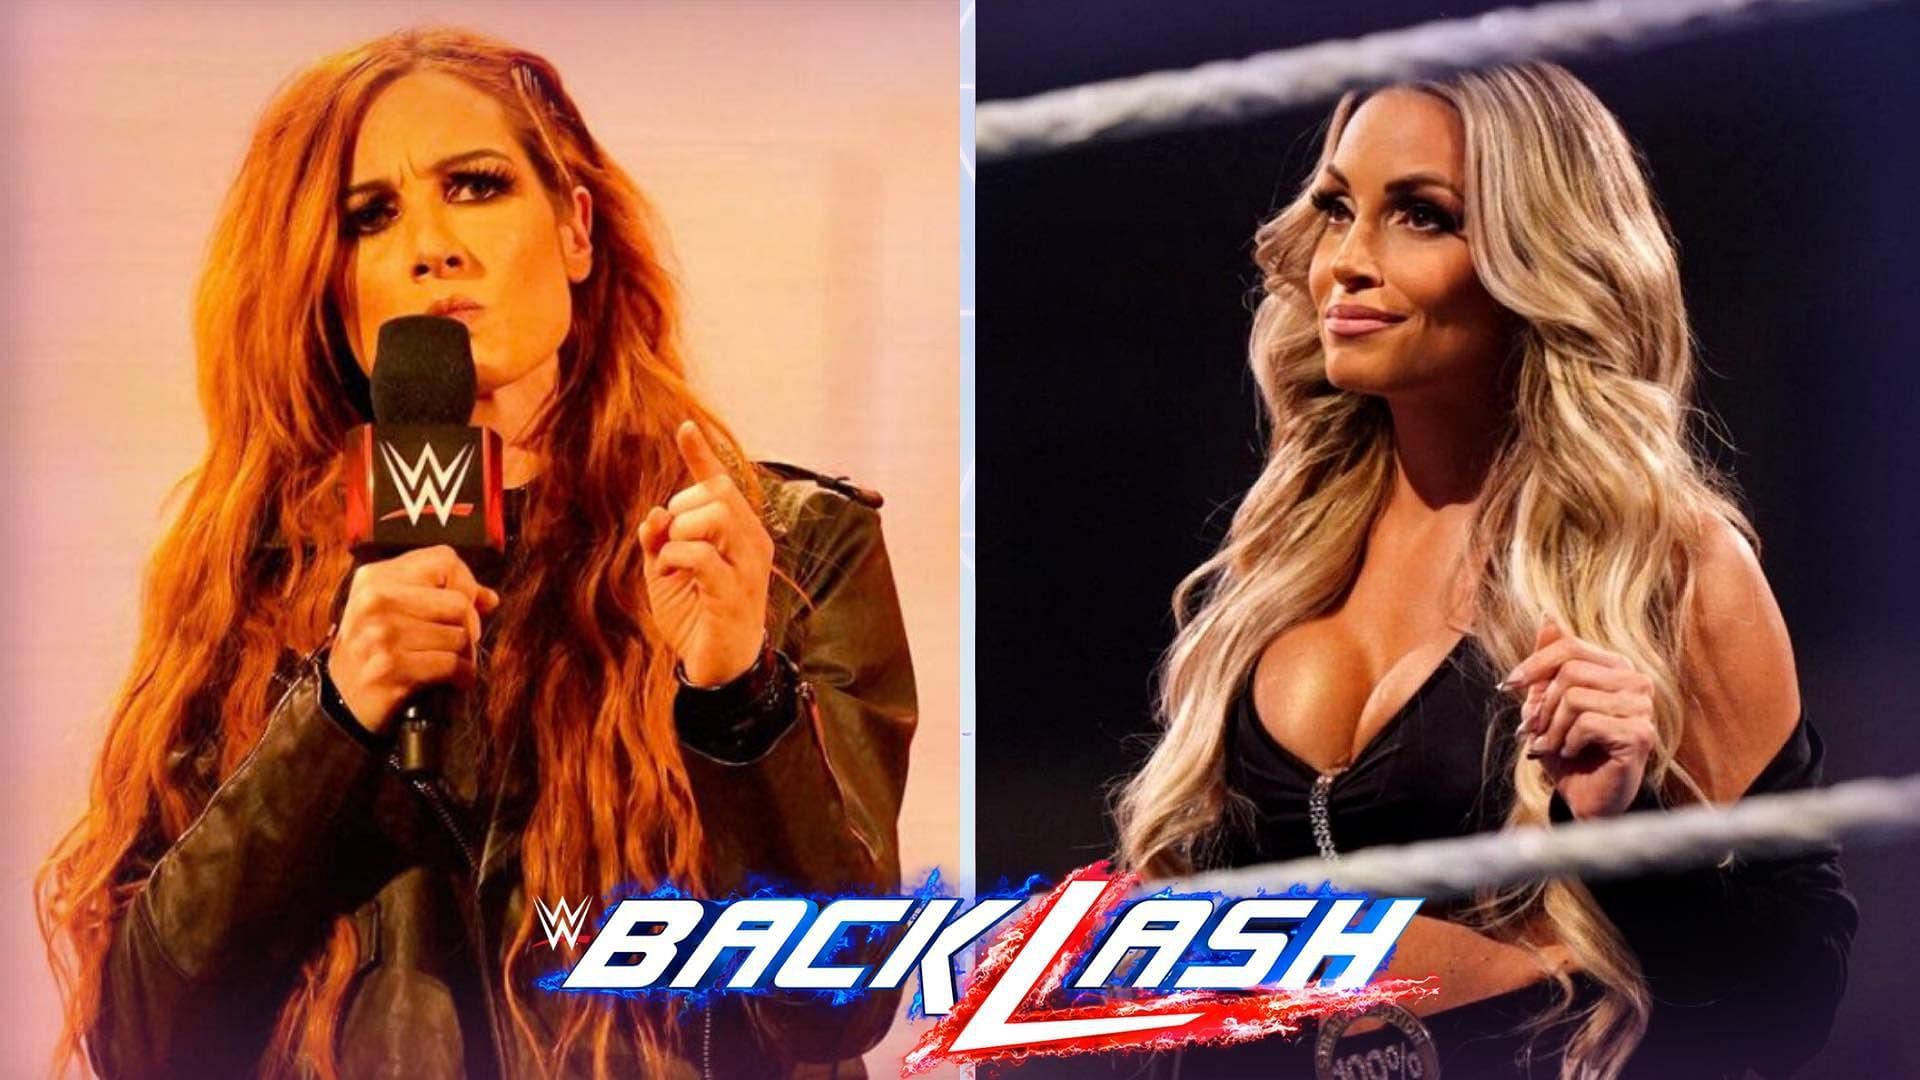 Becky Lynch could potentially compete at WWE Backlash